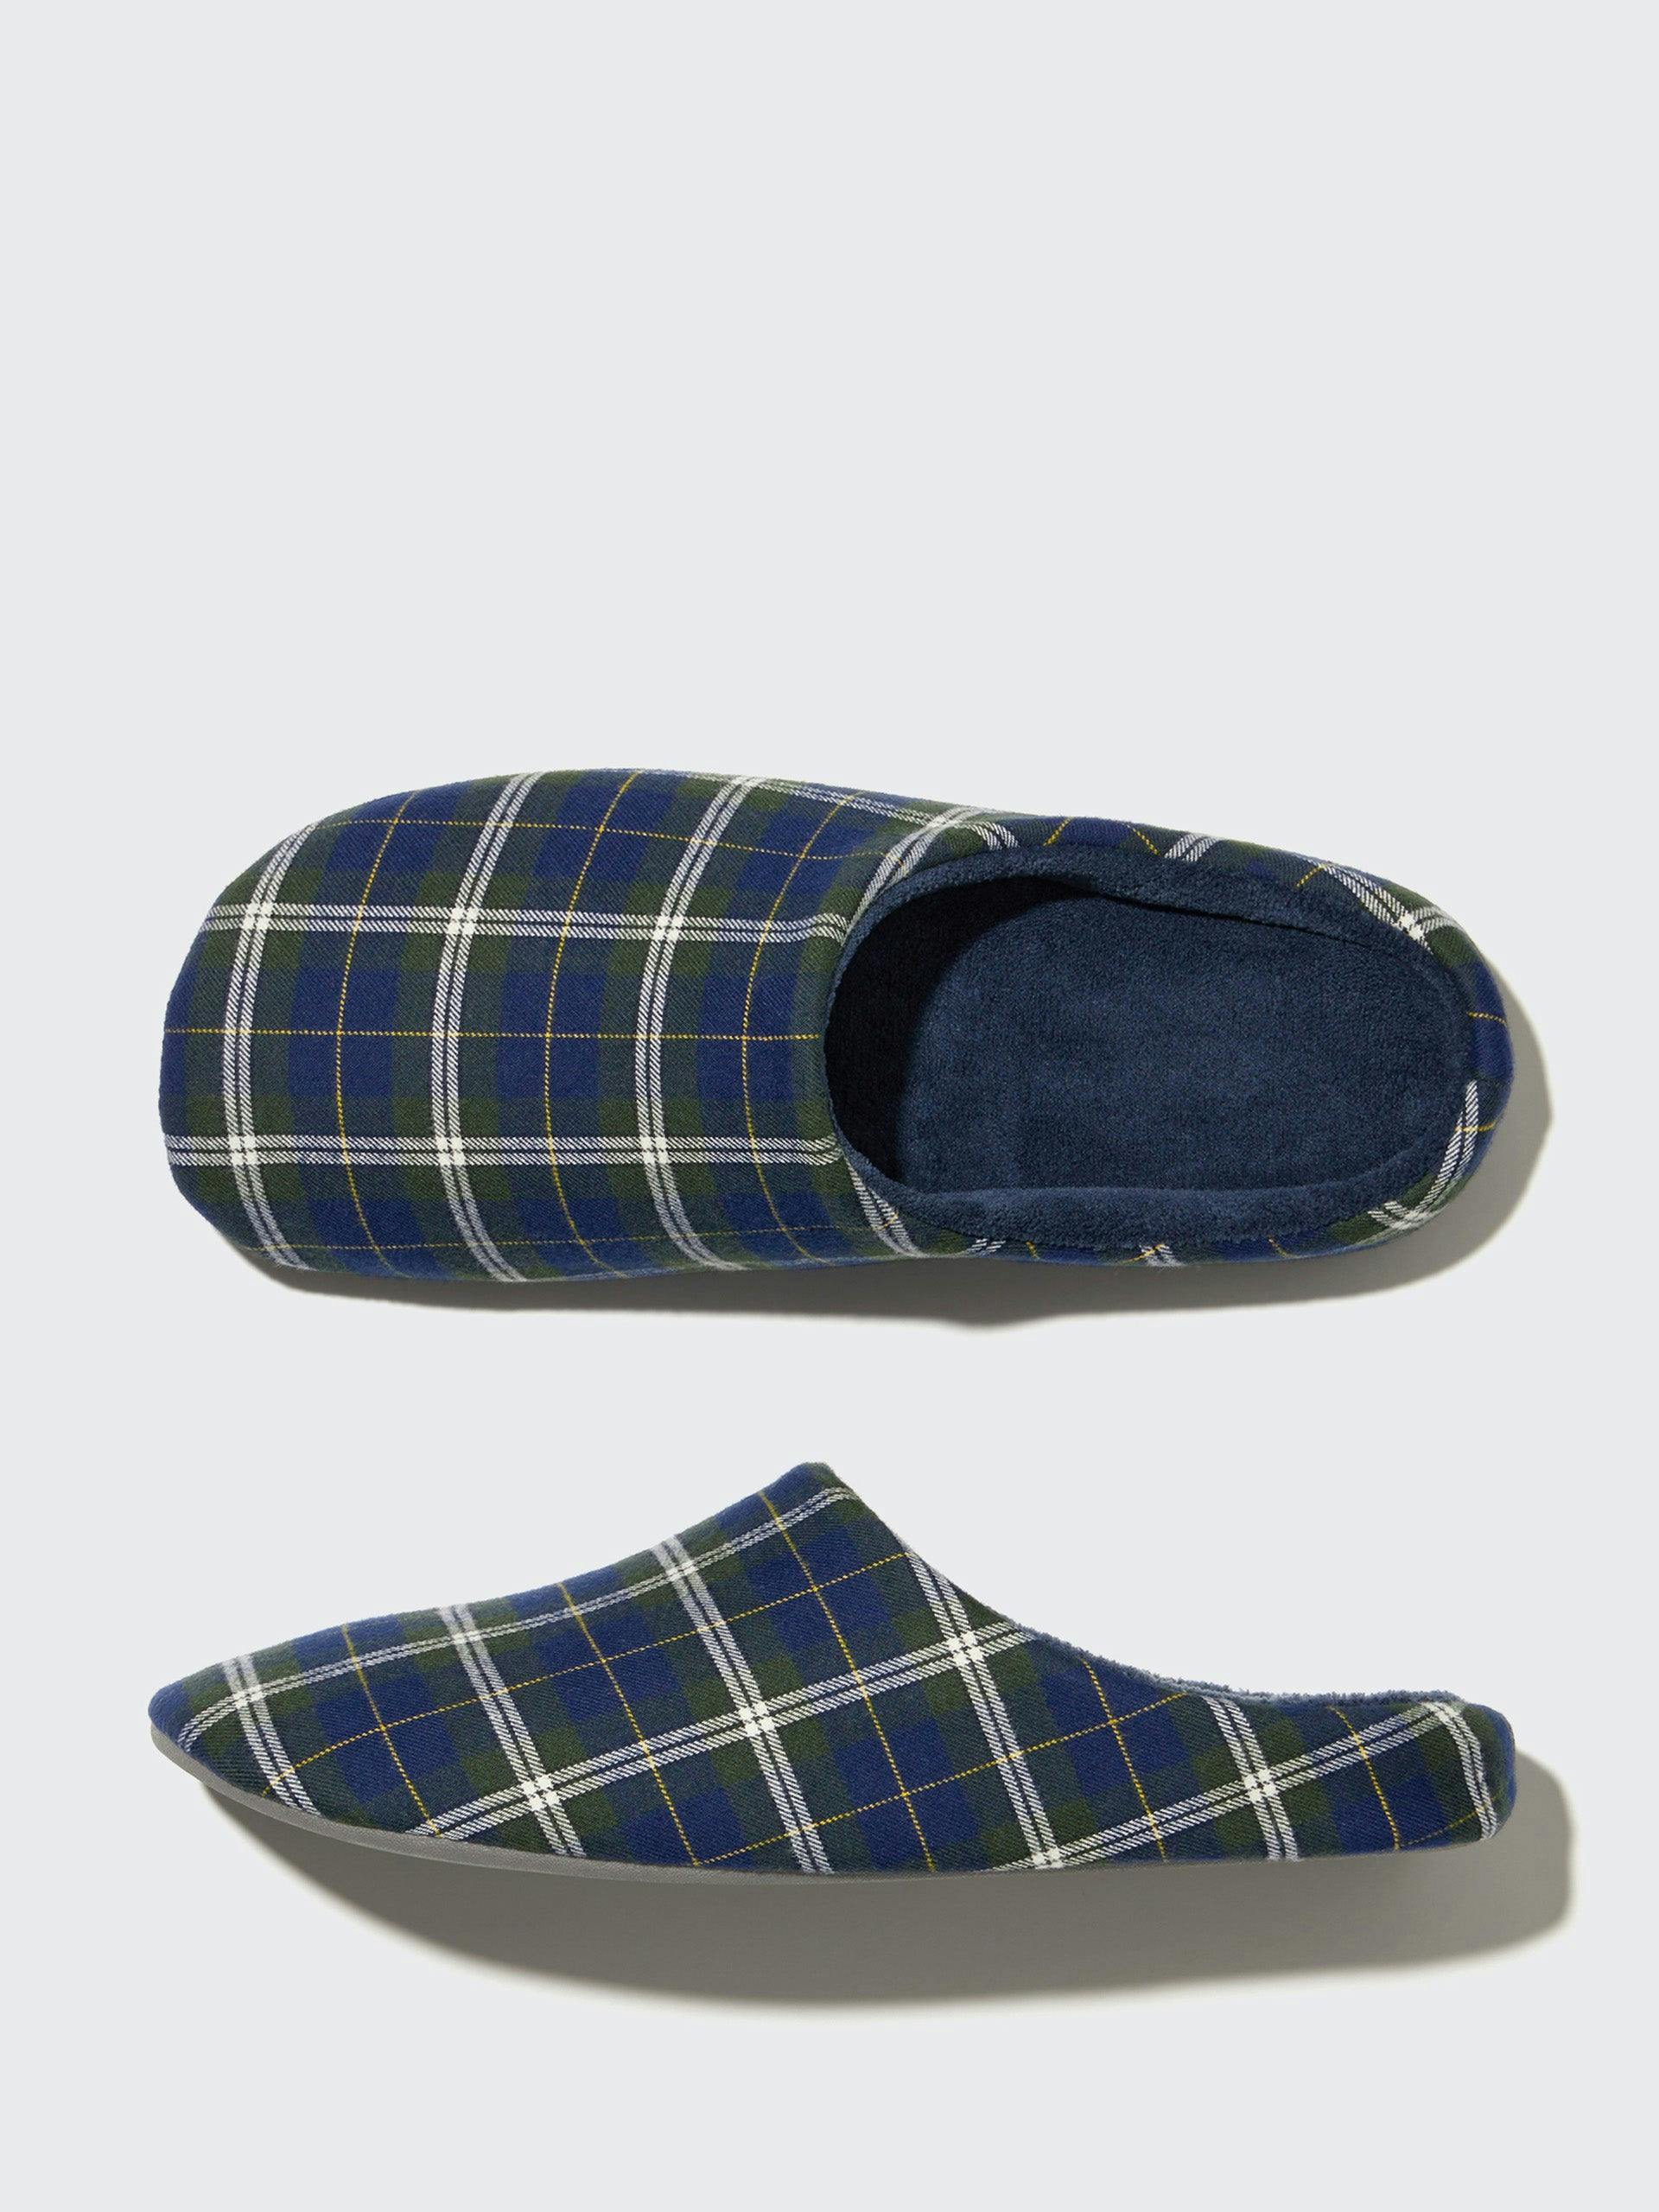 Flannel navy slippers